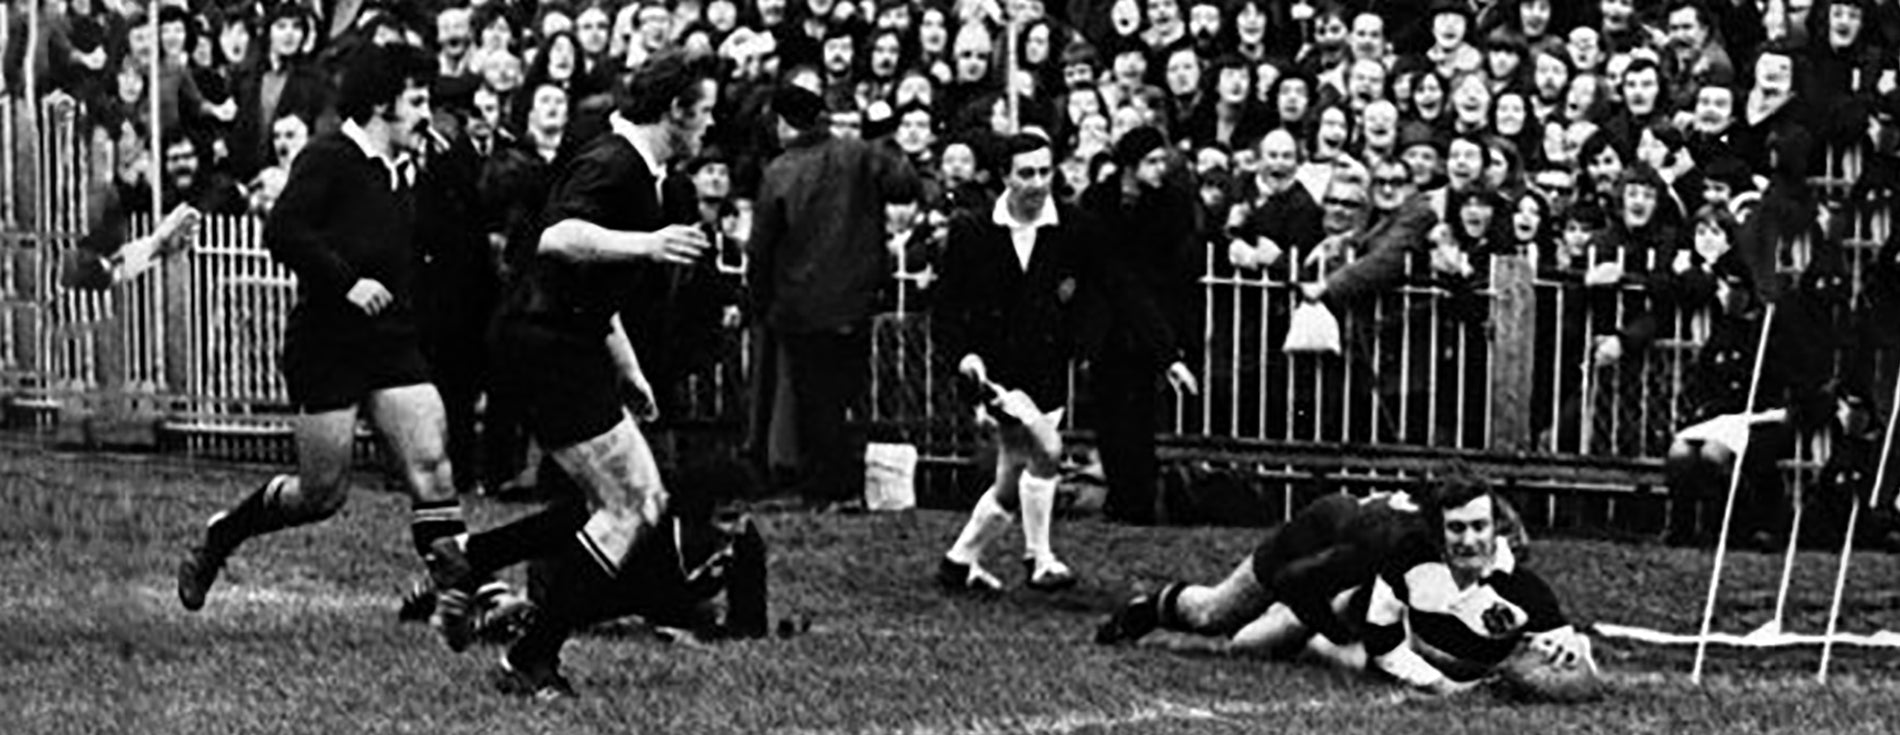 Rugby's Greatest Matches - Barbarians vs New Zealand - 1973